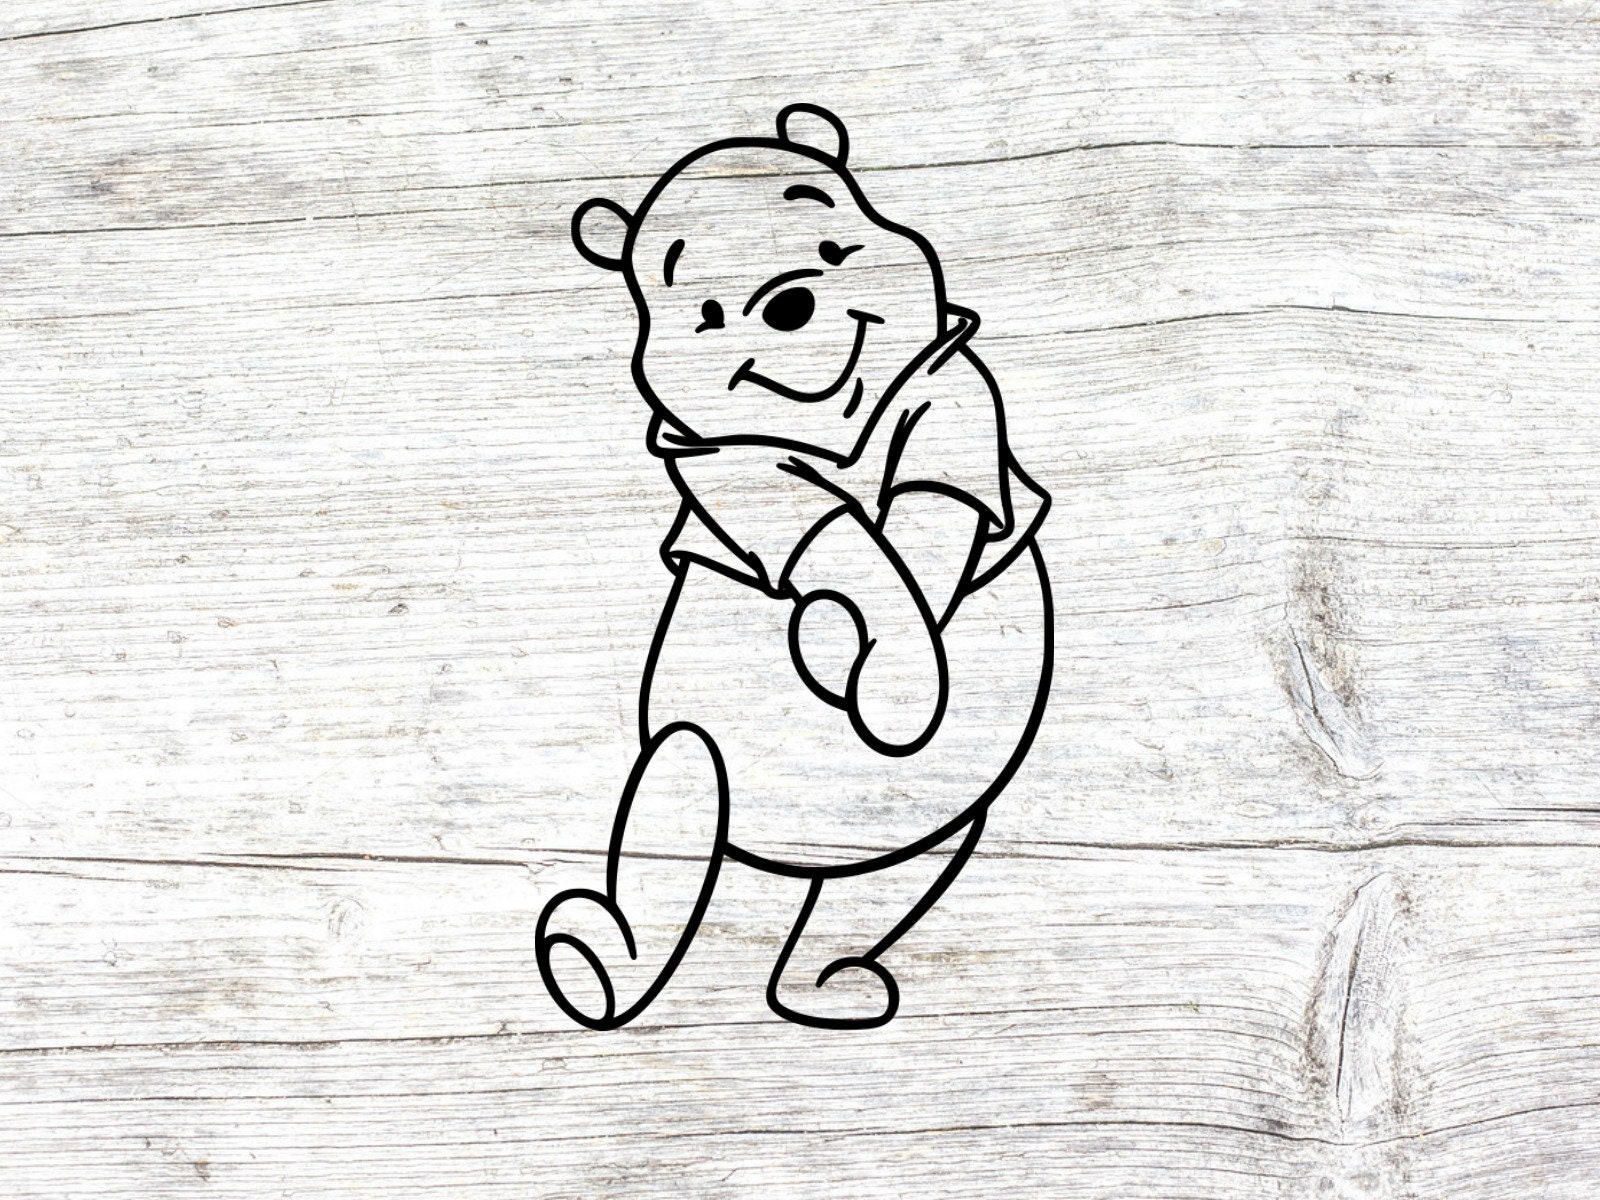 Download Disney's Winnie the pooh svg winnie the pooh clipart | Etsy